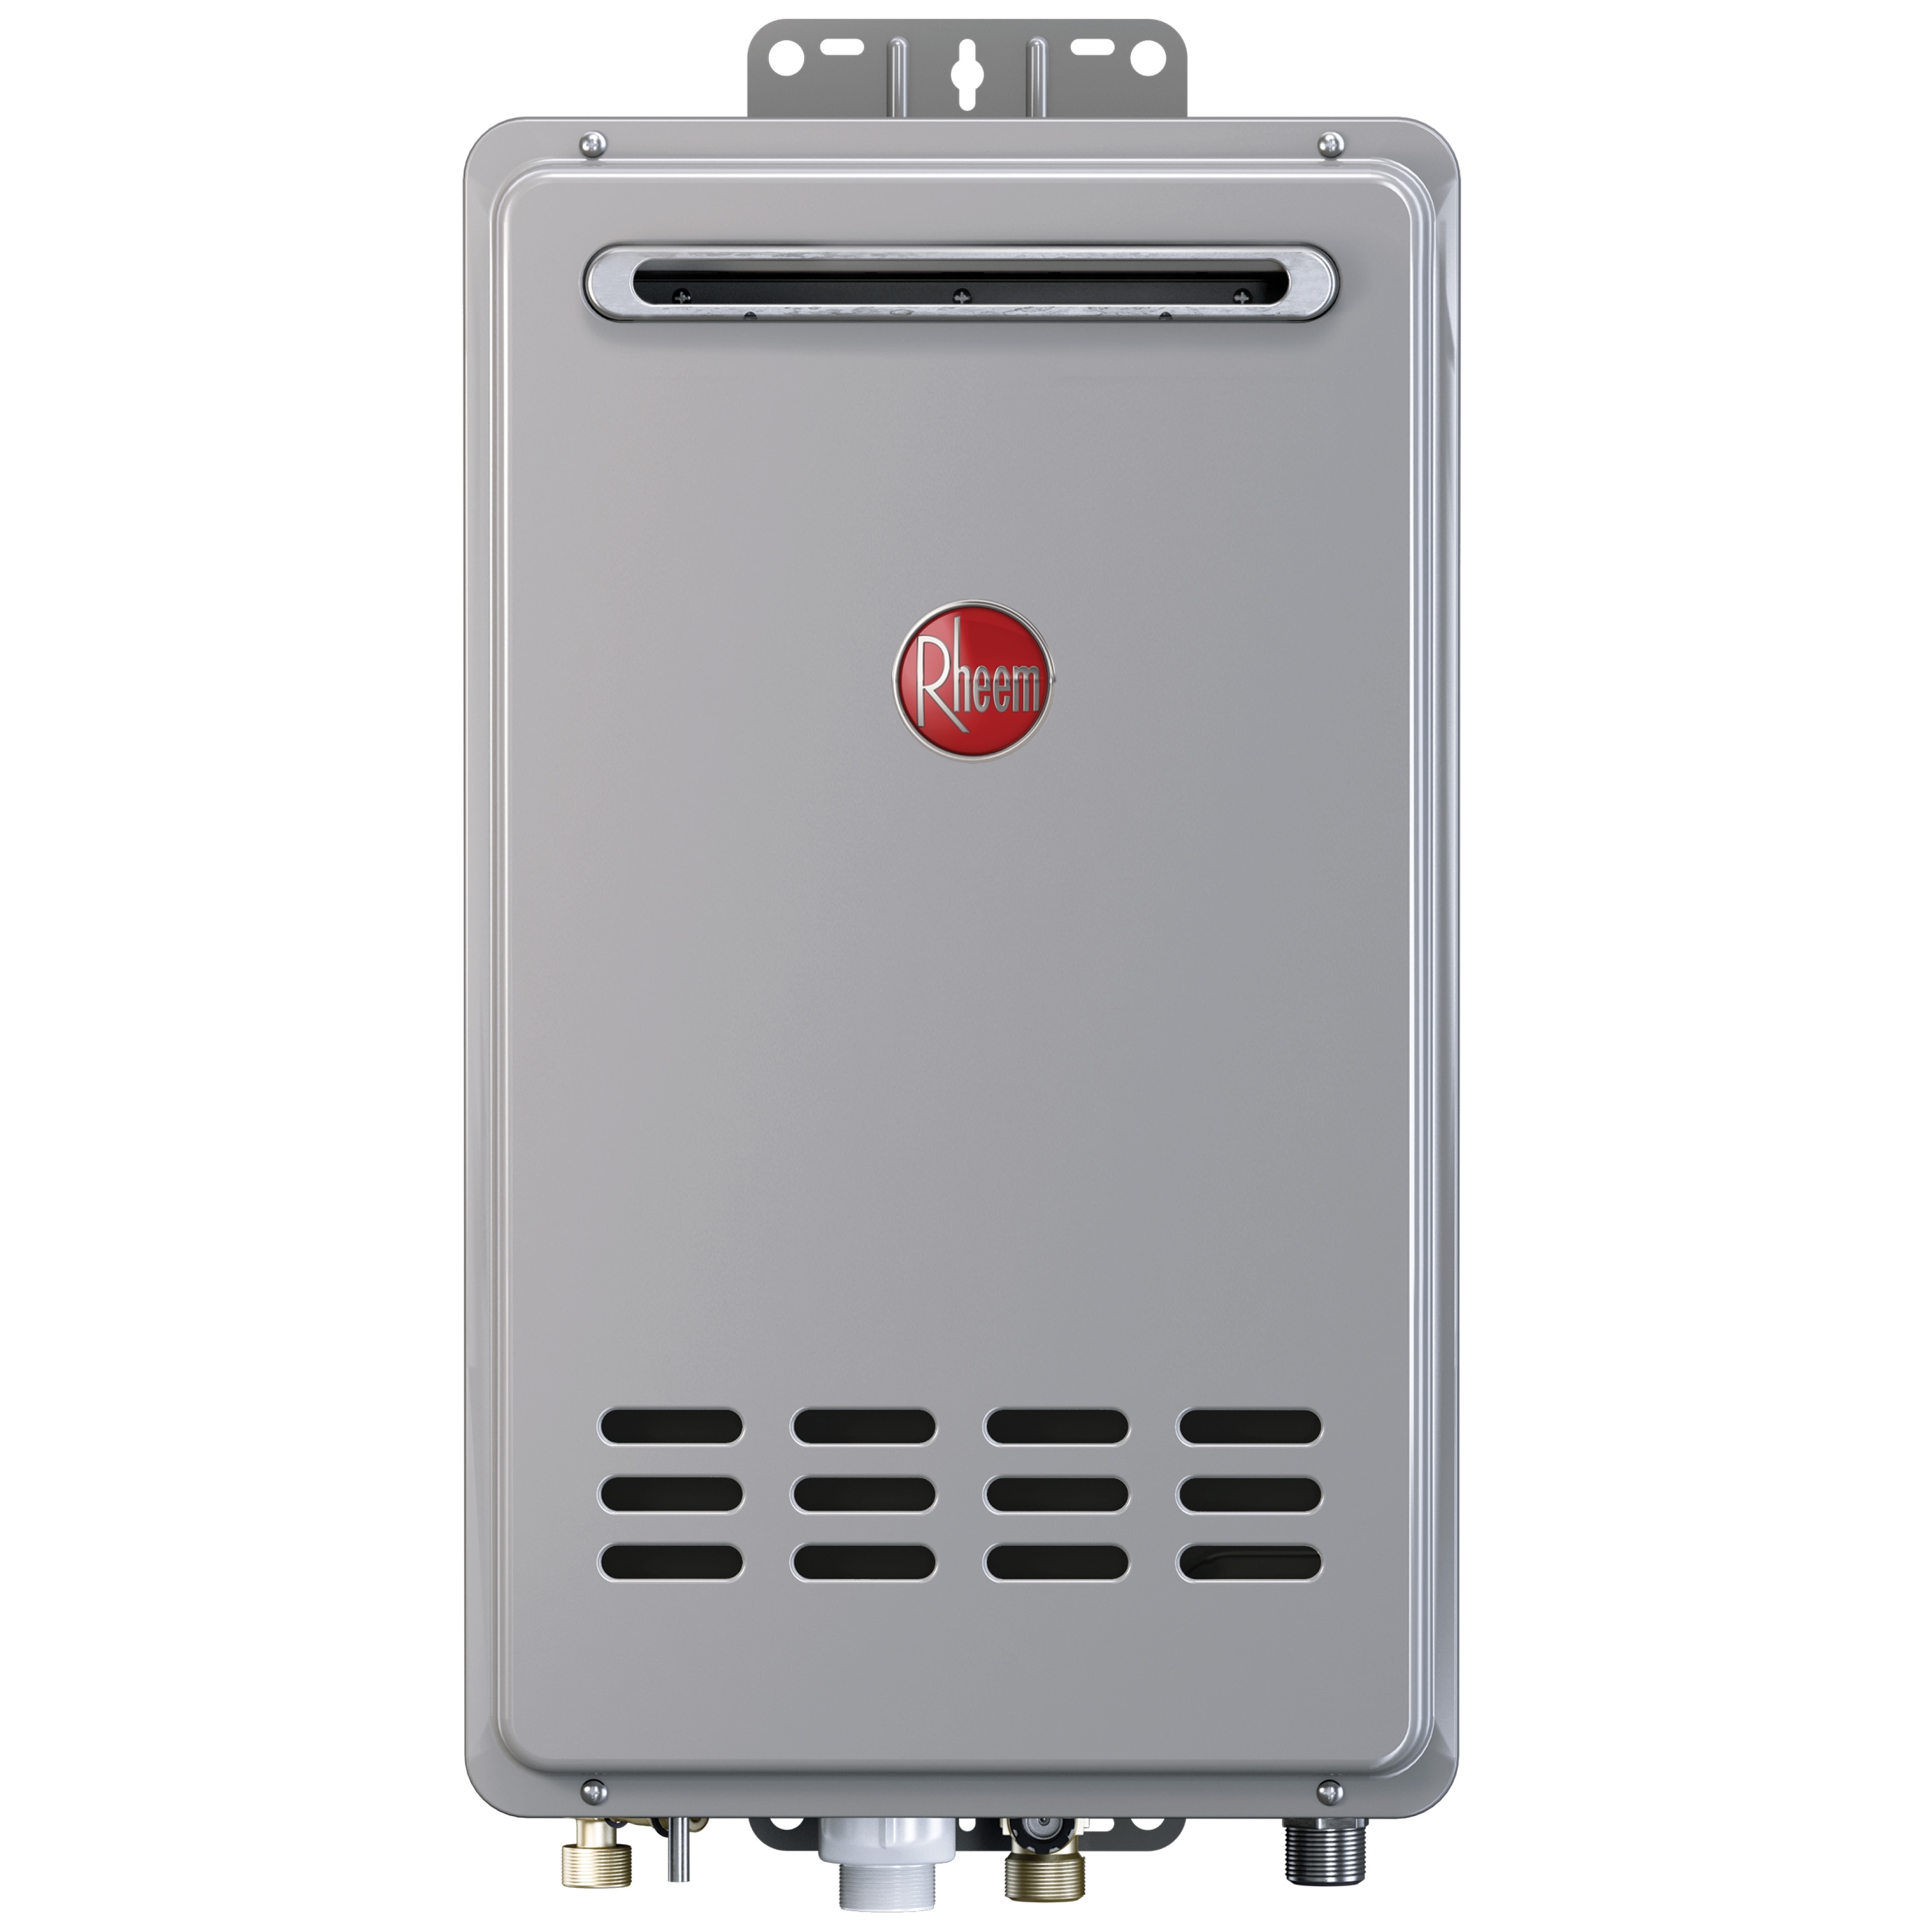 Rheem Non-Condensing 7.0GPM Outdoor Natural Gas Tankless Water Heater  14x10x26 On Sale Bed Bath  Beyond 30897302